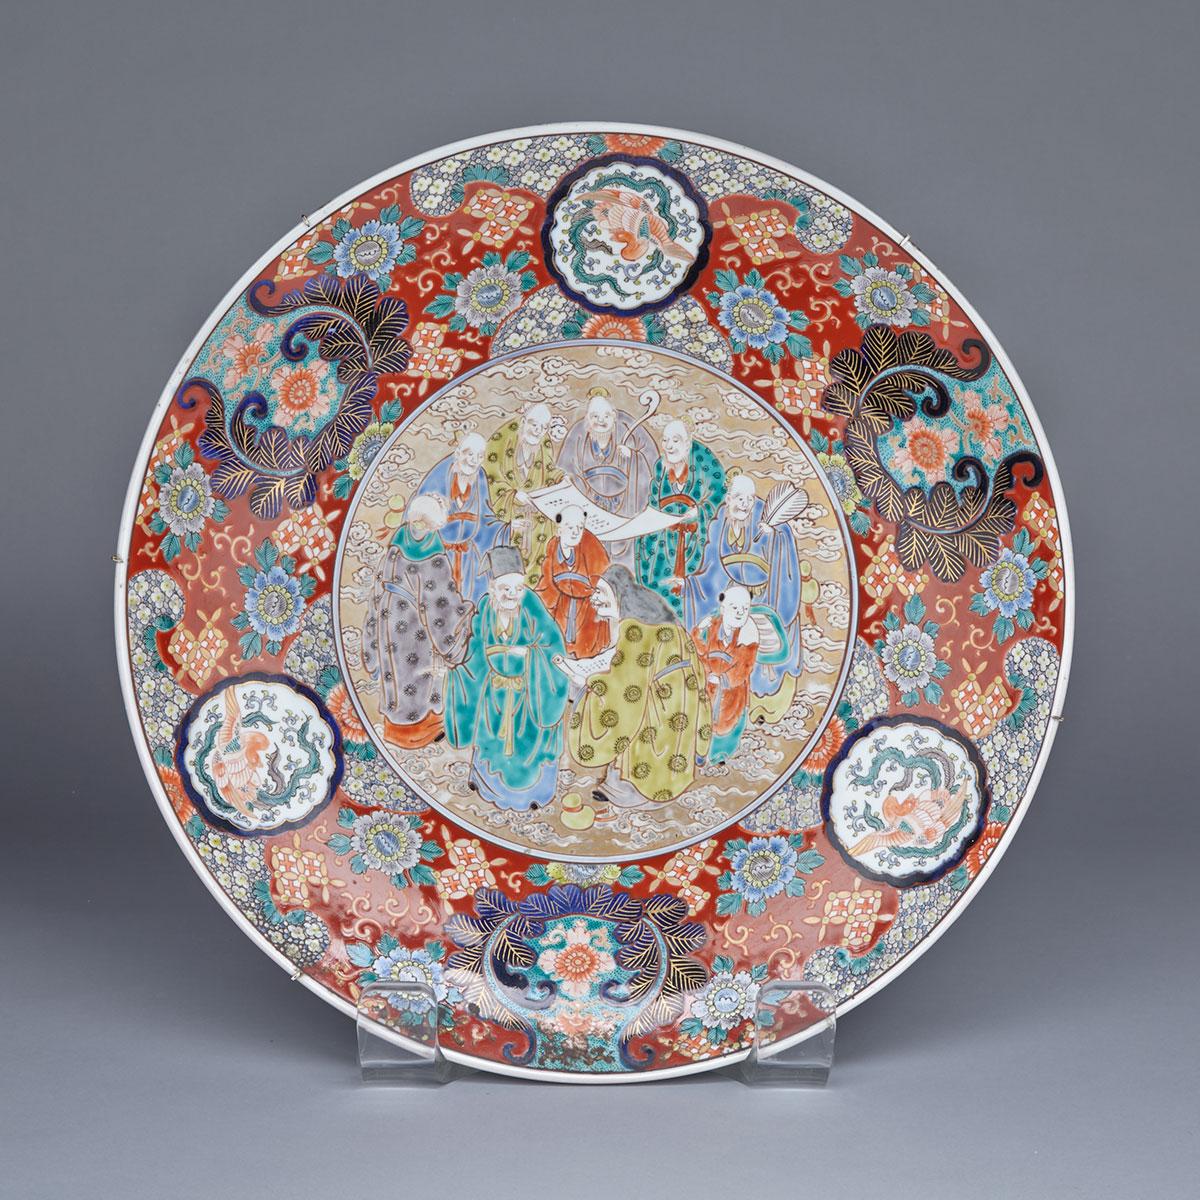 Large Imari ‘Scholars’ Charger, Meiji Period, Early 20th Century